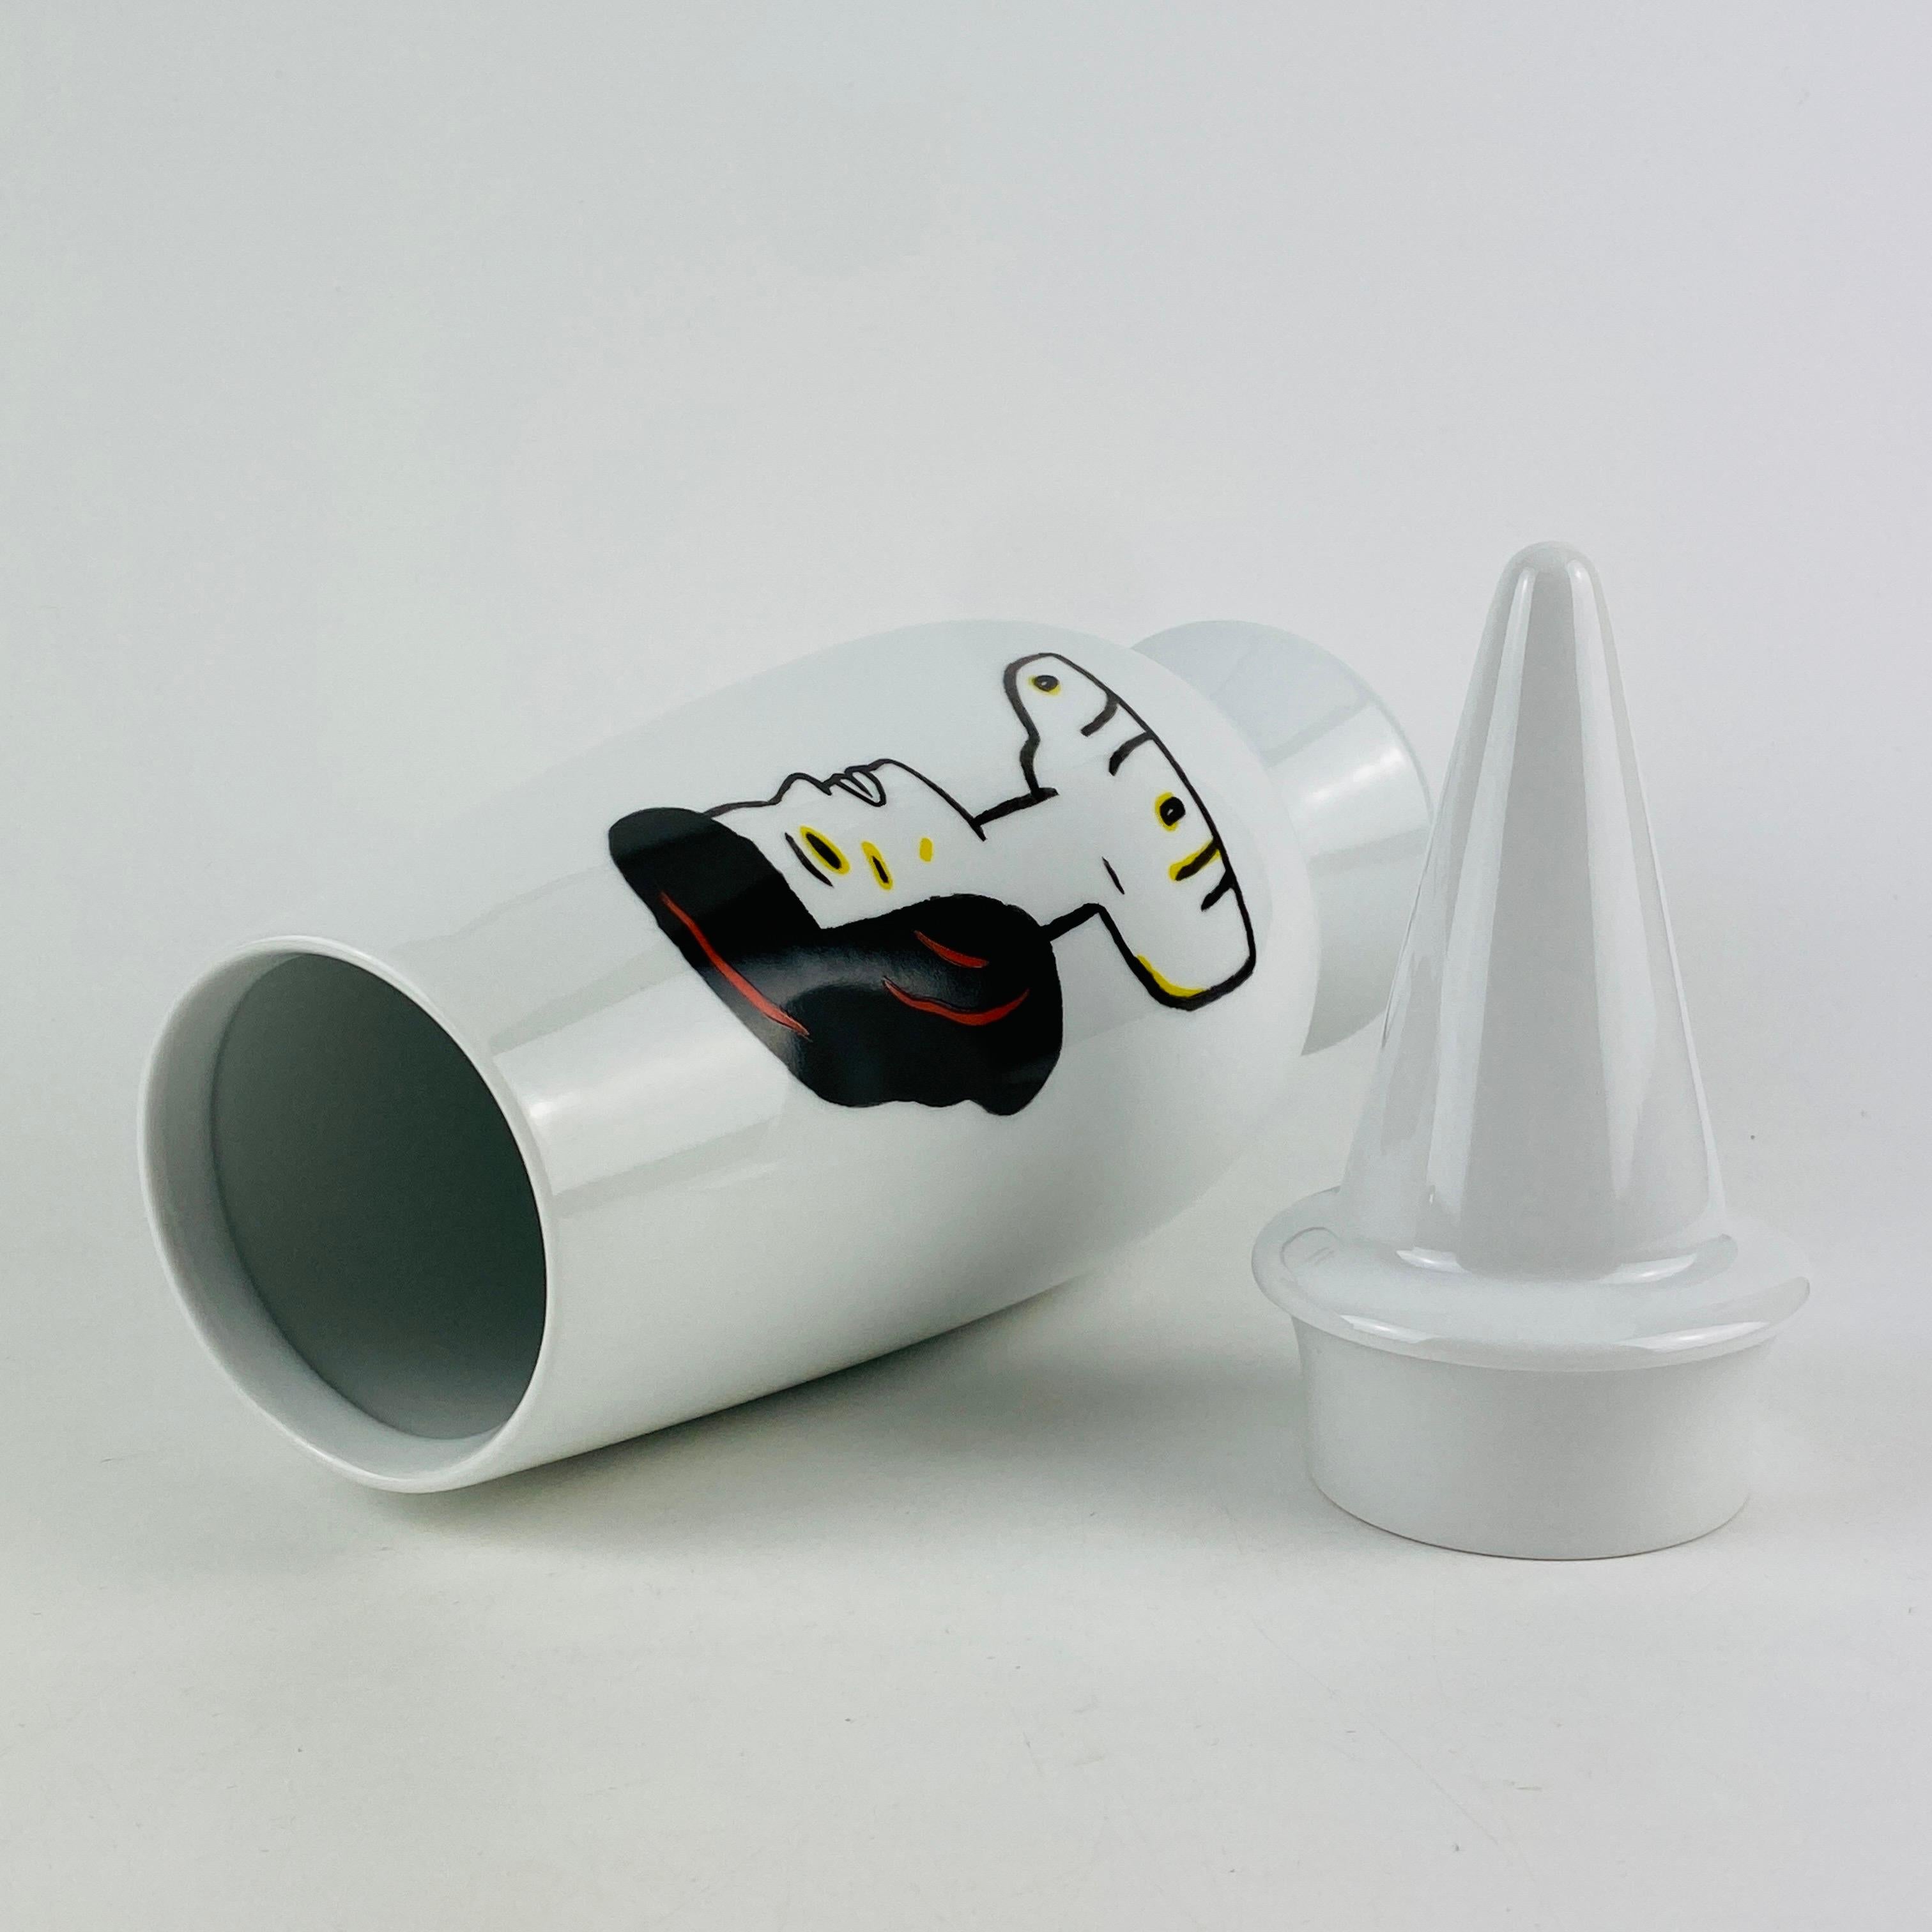 Porcelain Alessi Tendentse Vase by Guillermo Tejeda for A. Mendini 100% Make-Up Series N83 For Sale